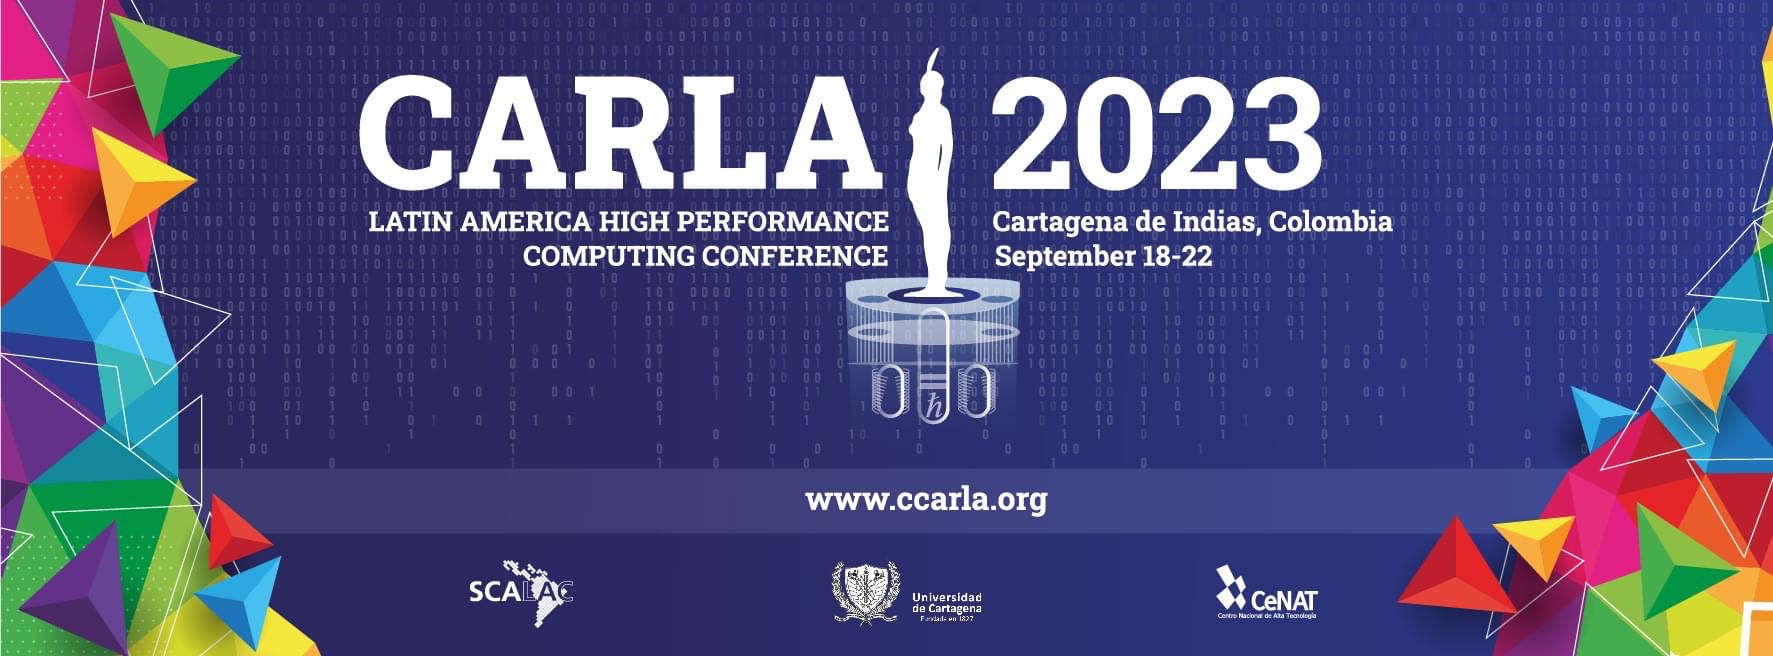 The Latin America High Performance Computing Conference comes to Mexico